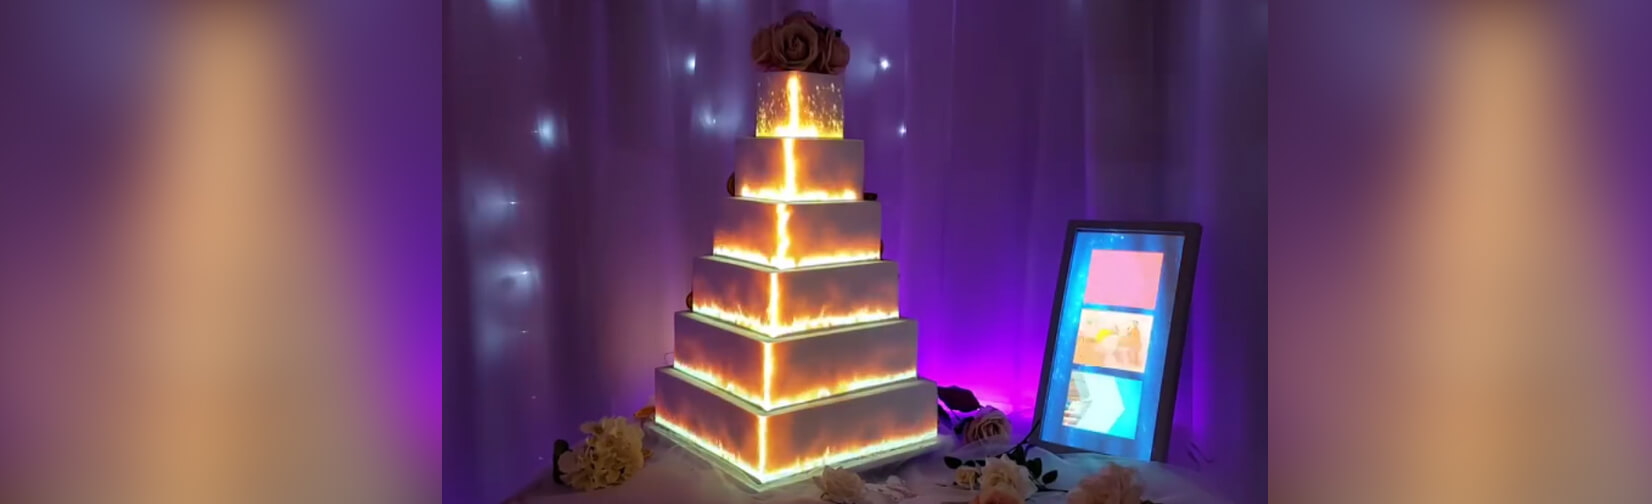 couples project moving video images onto their wedding cakes